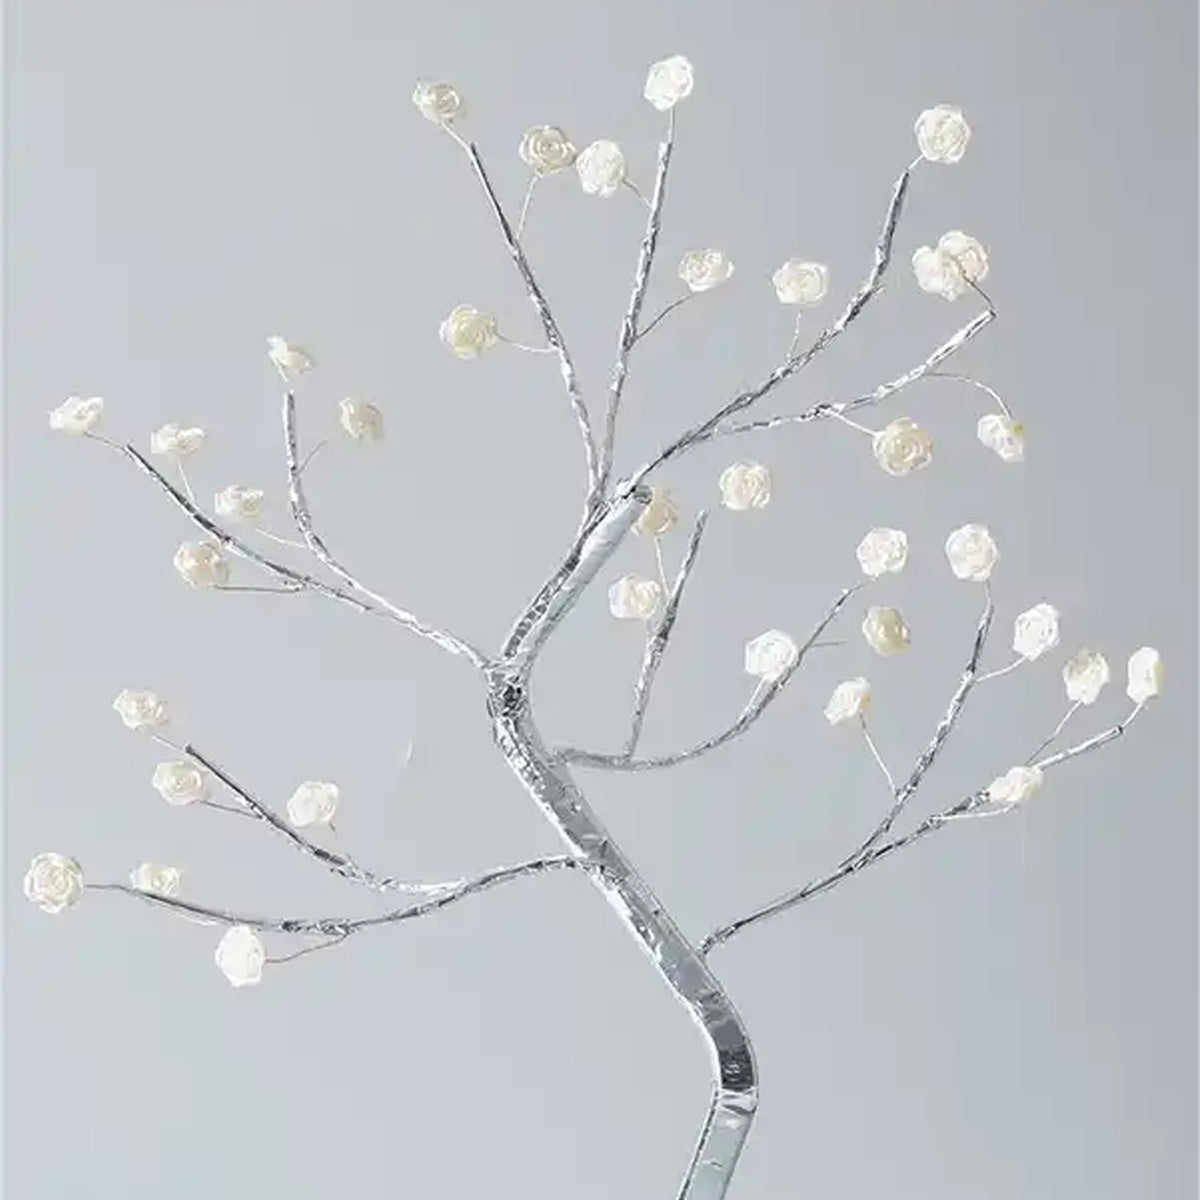 DIY Artificial 36 Warm White Rose Lights Tree Lamp: Create a Calm Atmosphere with Tabletop Bonsai spirit Tree Light Touch Switch Decoration(WW ROSE)